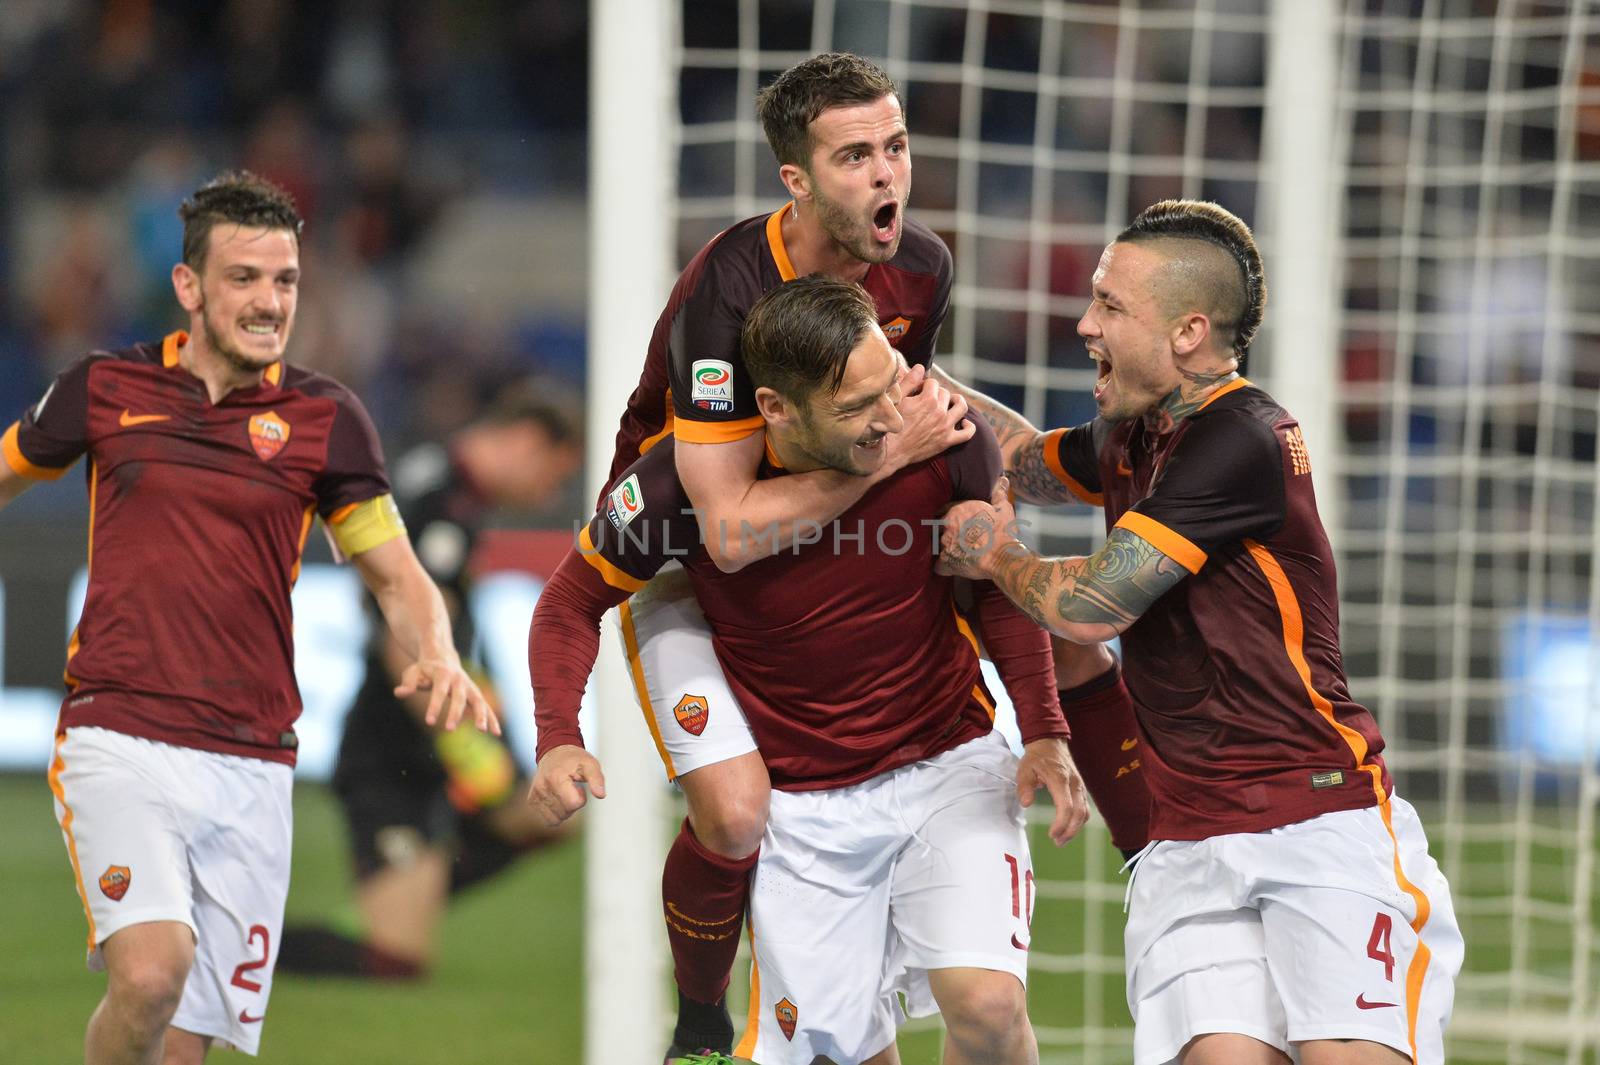 ITALY, Rome: Francesco Totti with his teammates of AS Roma celebrates after scoring the team's third goal from penalty spot during the Serie A match between AS Roma and Torino FC at Stadio Olimpico on April 20, 2016 in Rome, Italy.